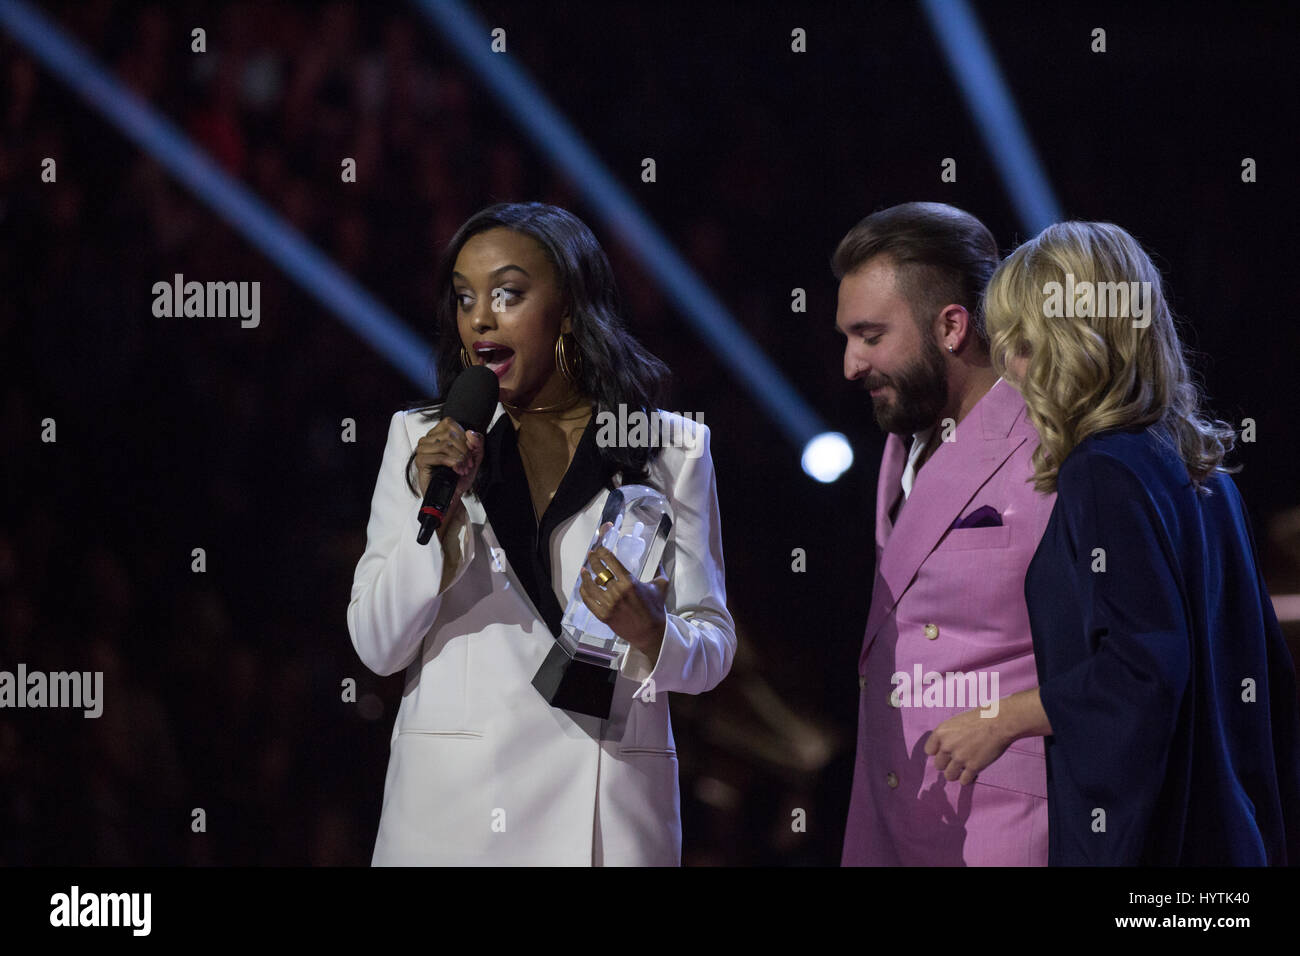 Ruth B accepts the Breakthrough Artist of the Year Award at the 2017 Juno Awards. Stock Photo